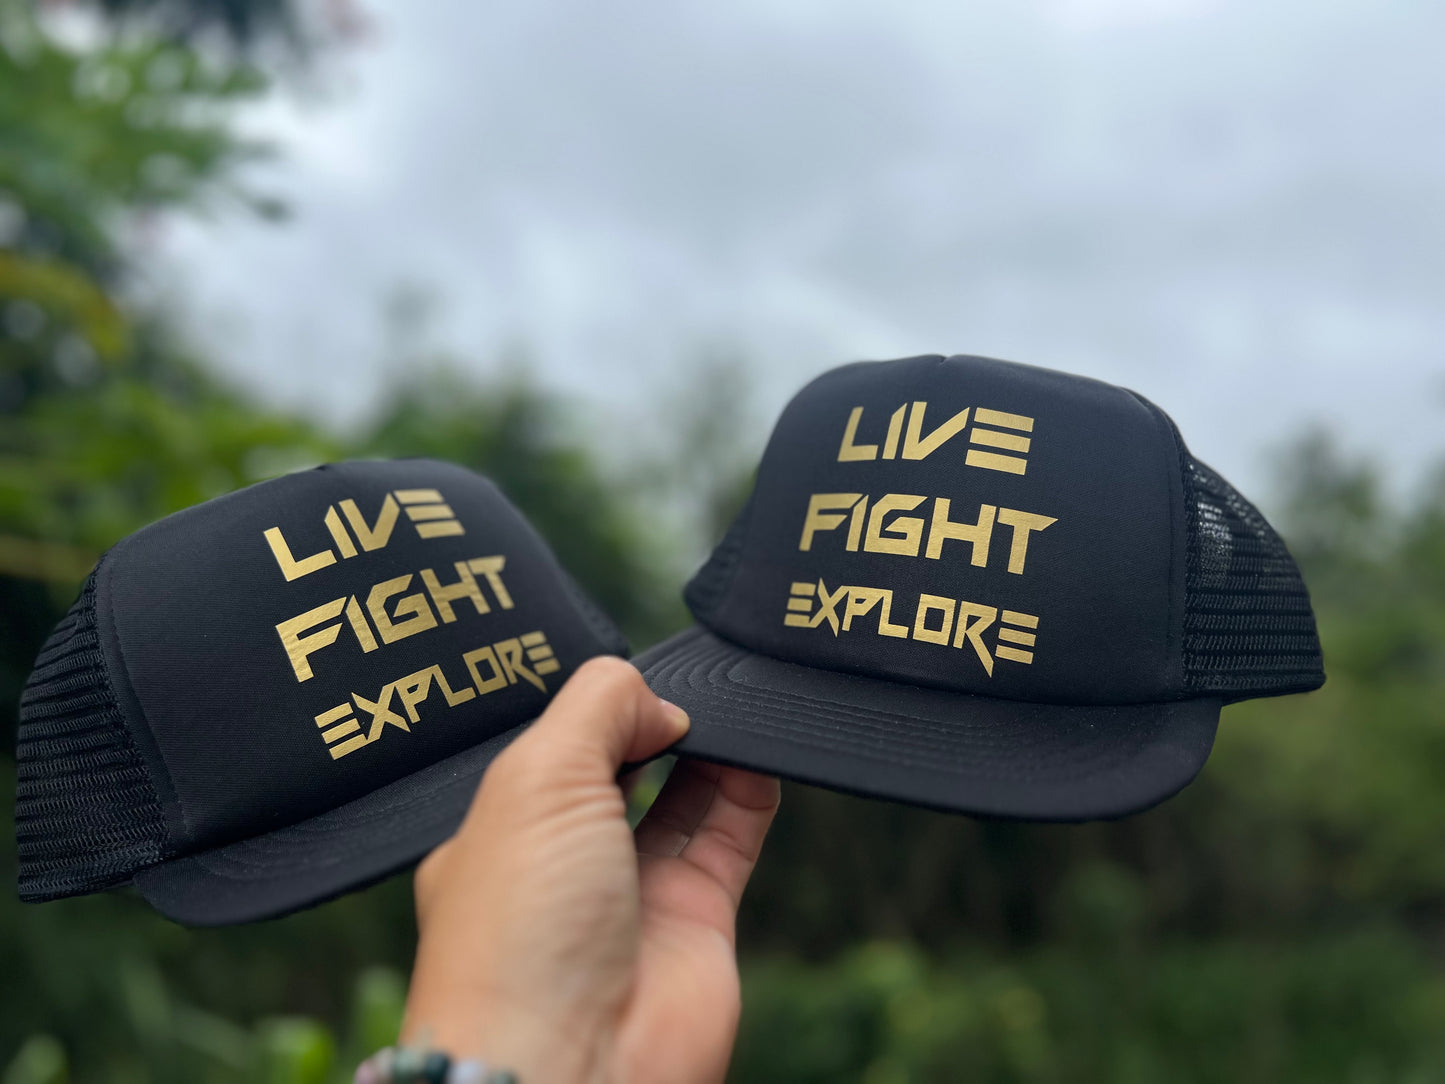 Hawaii Whippers Union Live Fight Explore Trucker.